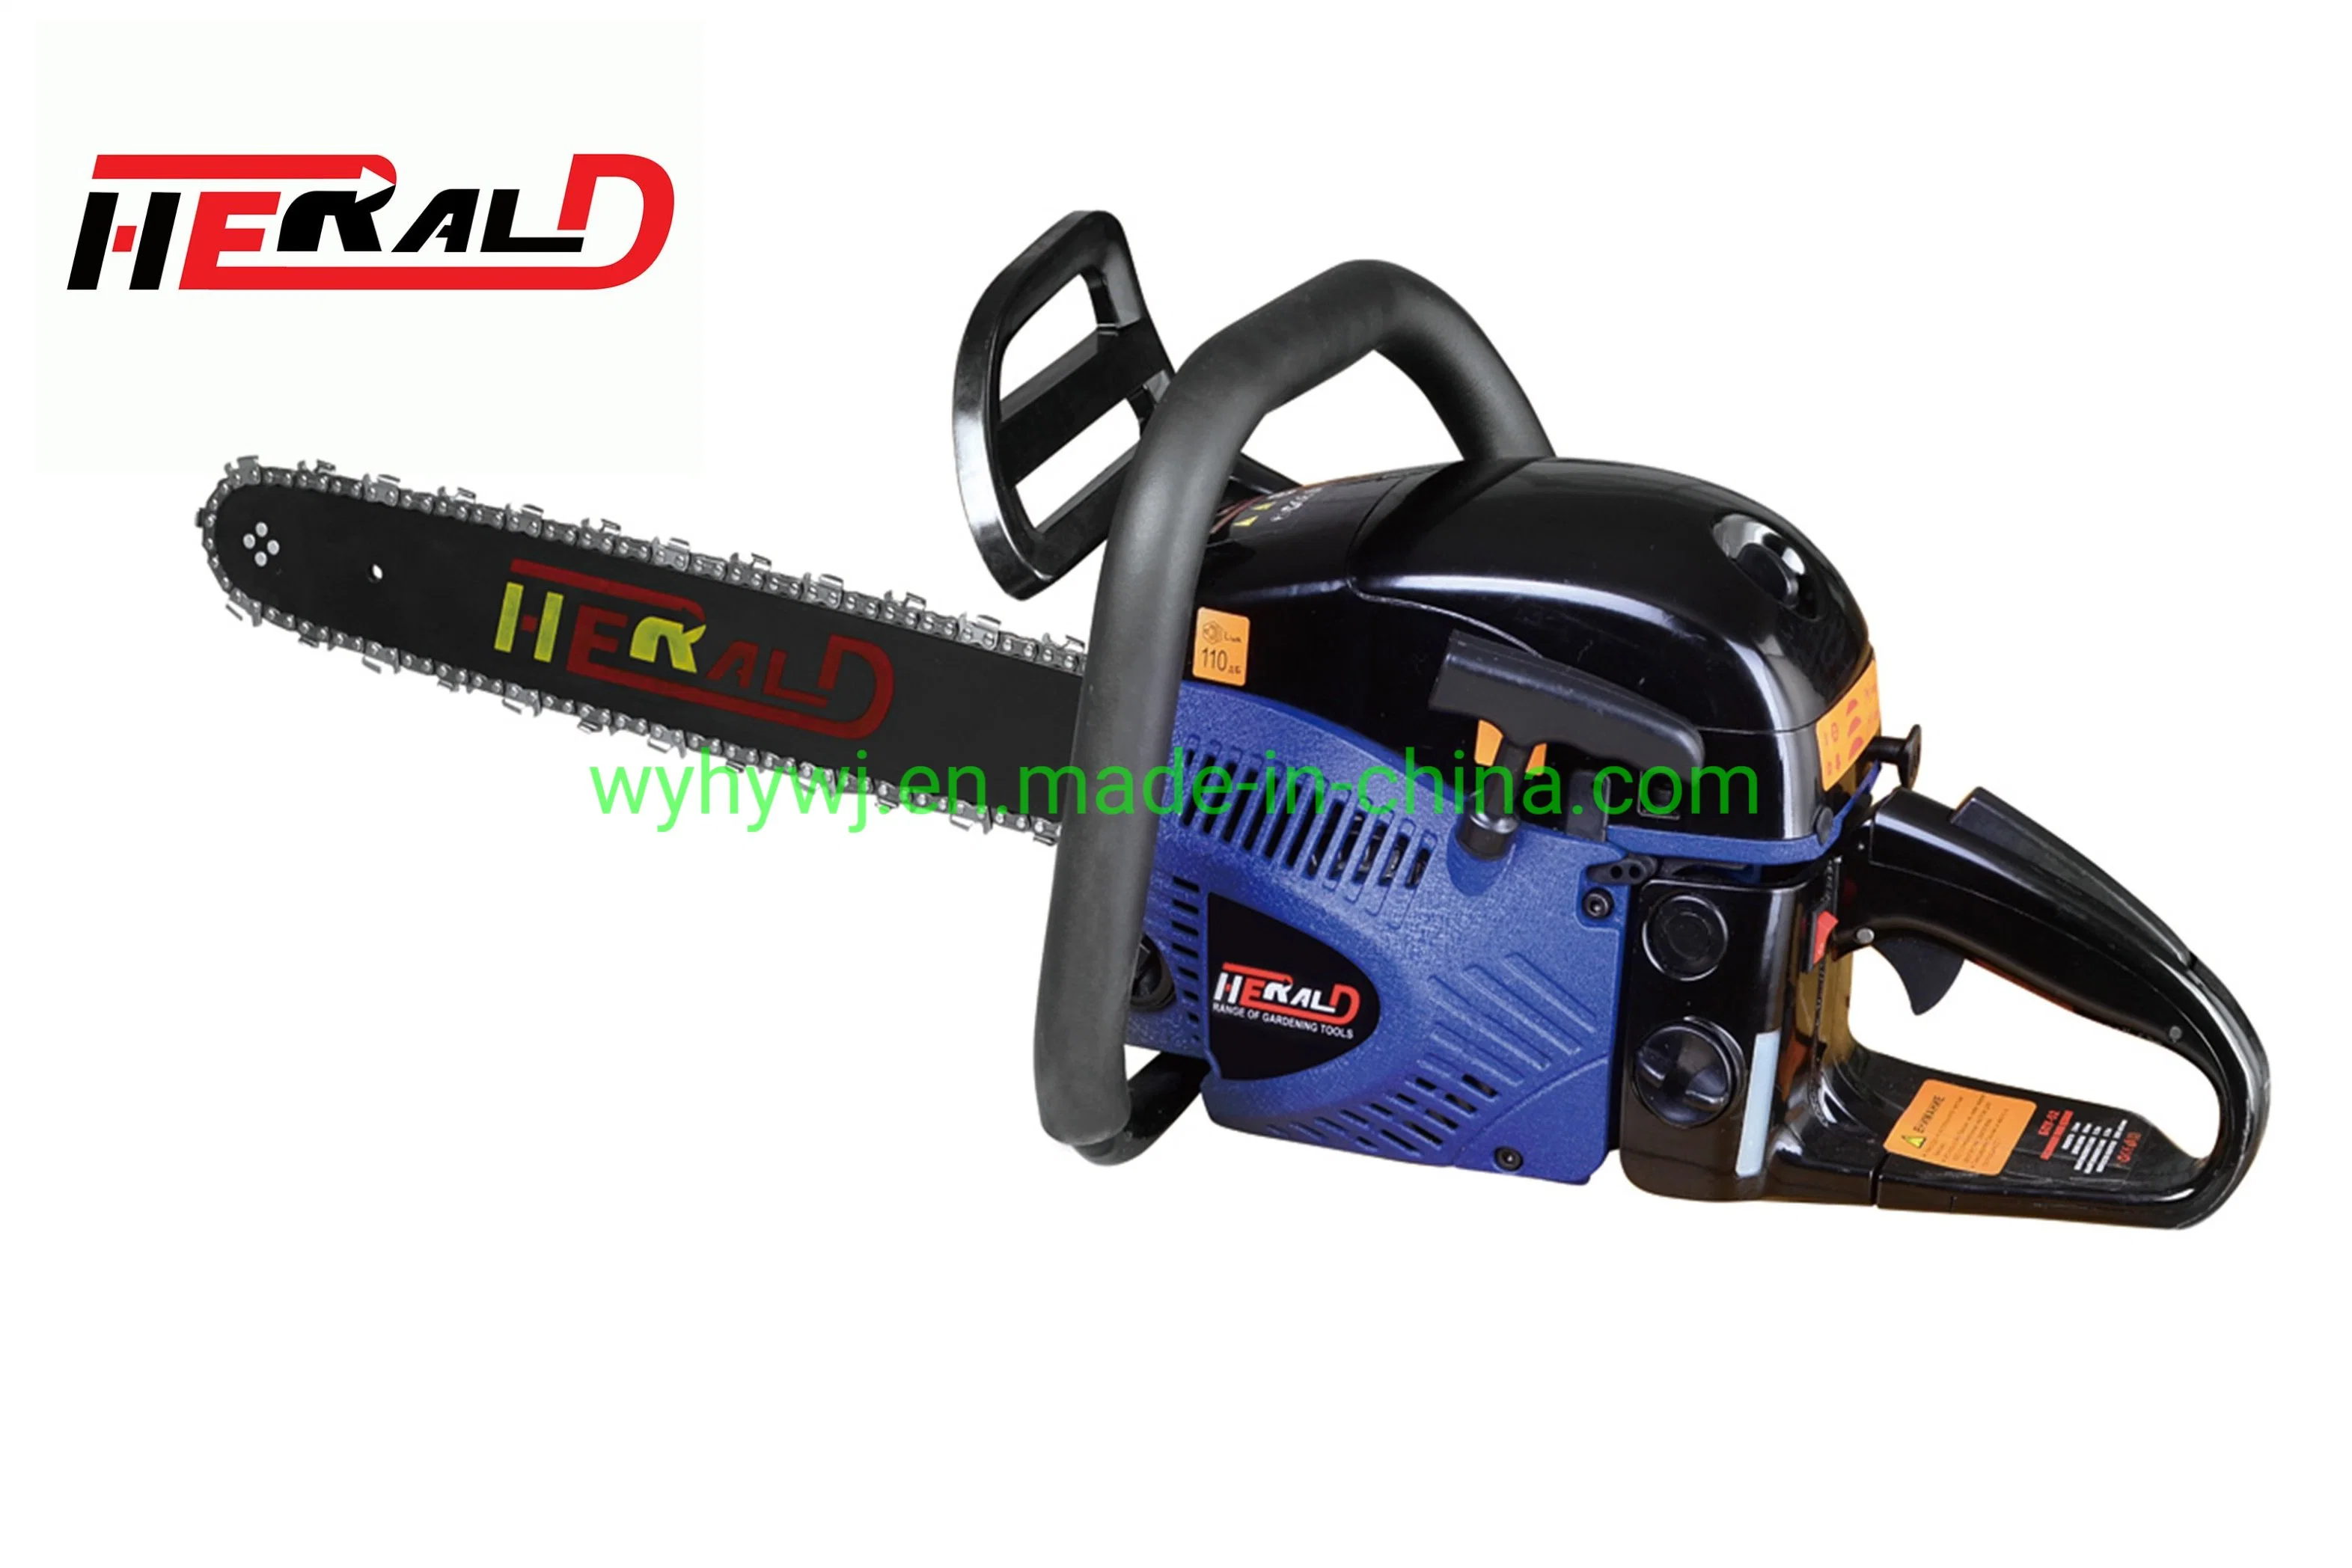 Famous High Quality Economy Alu. Start Gasoline Chain Saw Hy-58f 52cc/20'' Hot Seller Strong Power OEM Petrol Saw Cutting Wood/Tree Garden Tool